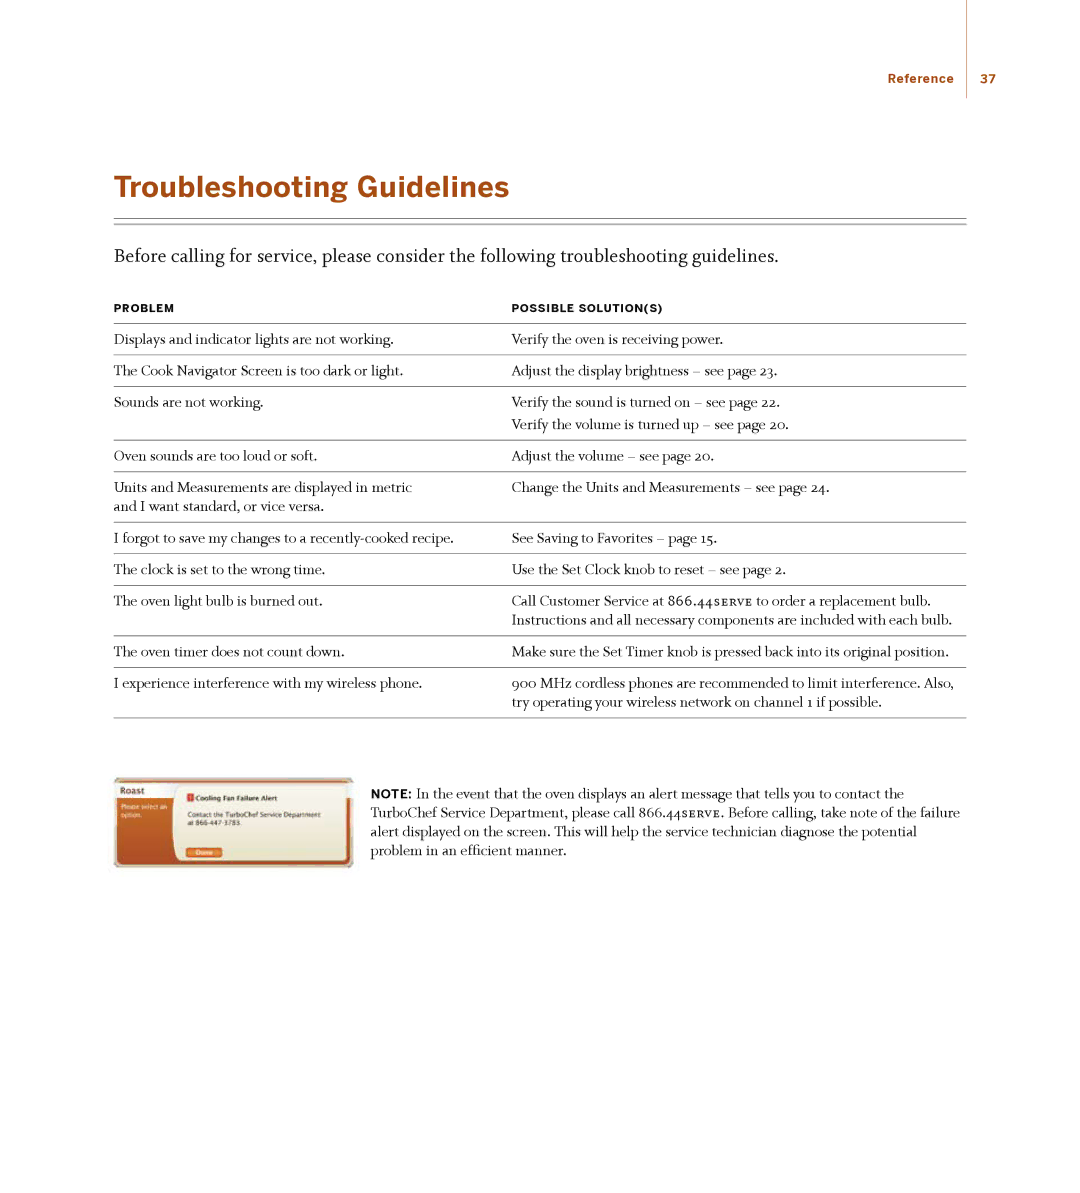 Turbo Chef Technologies 30 manual Troubleshooting Guidelines 